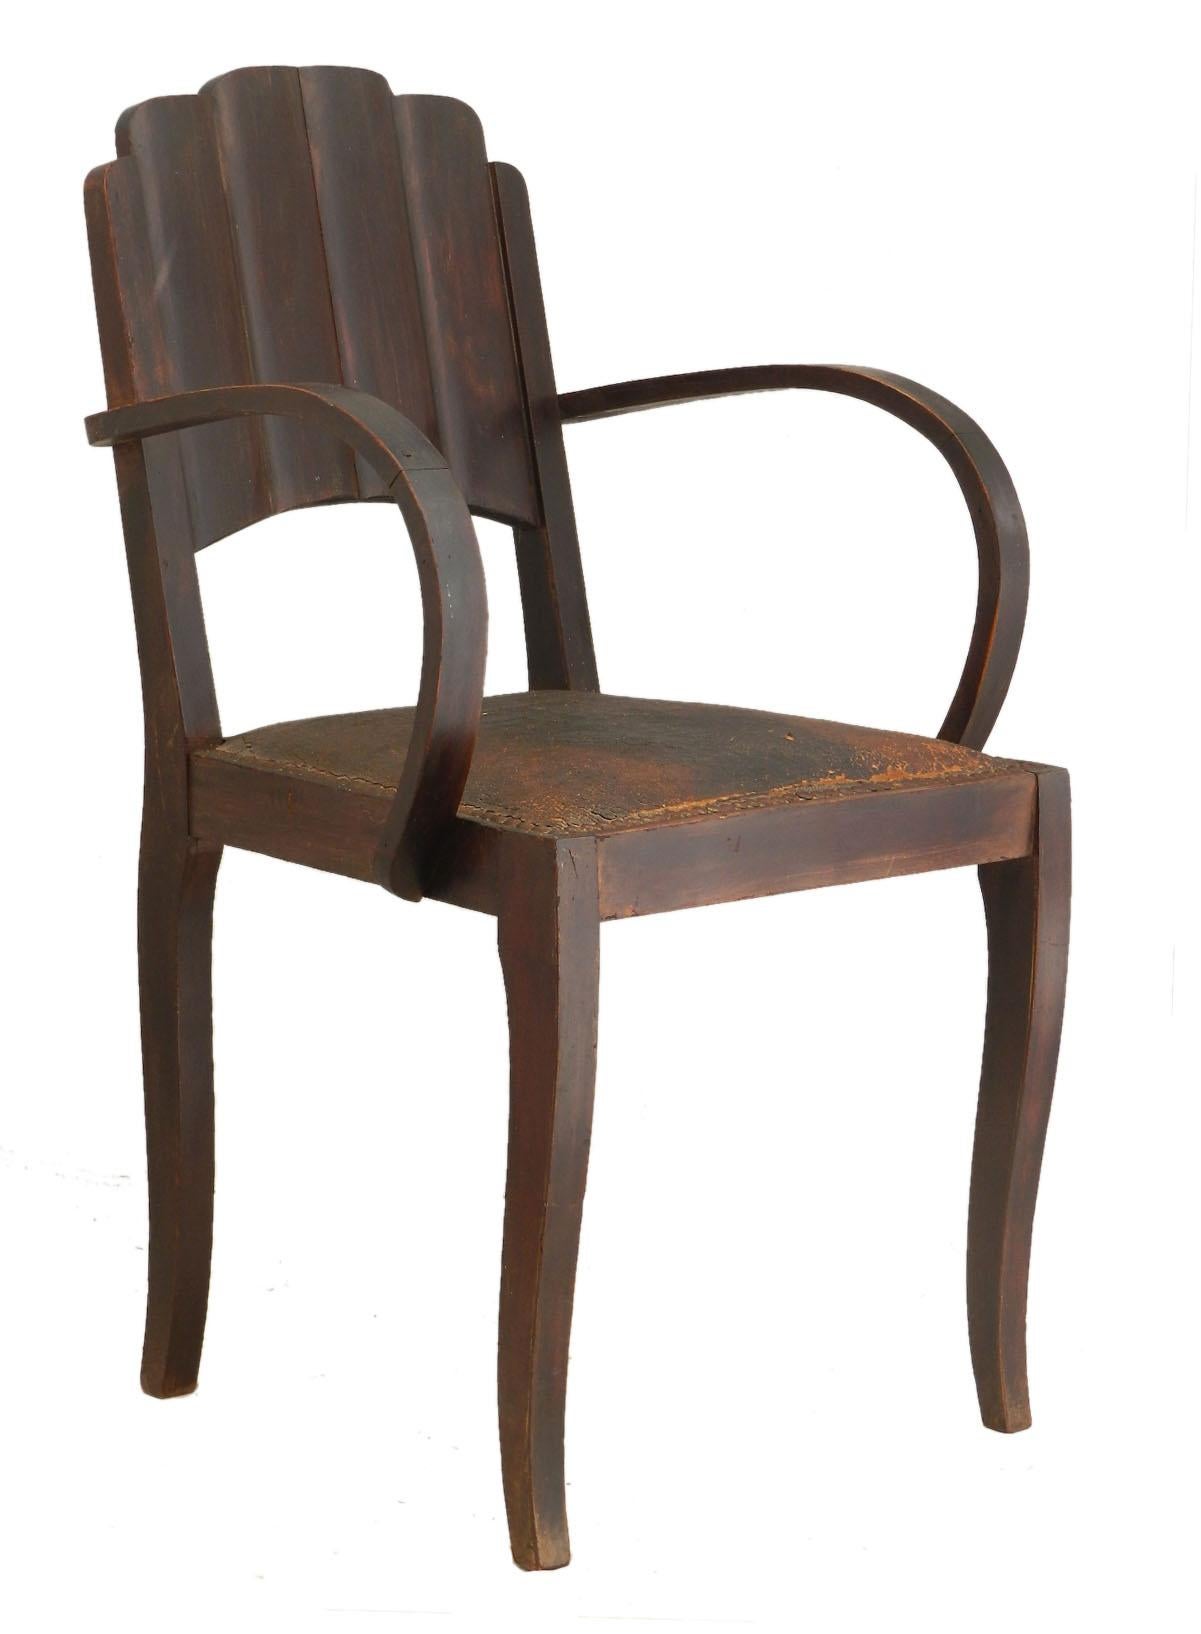 Open armchair Art Deco French bridge chair carver includes recovering excludes cost of fabric
Five available price is per item
Dining or side chairs
Odeon backs
At present covered in worn out leather
We can recover these to leather or fabric of your